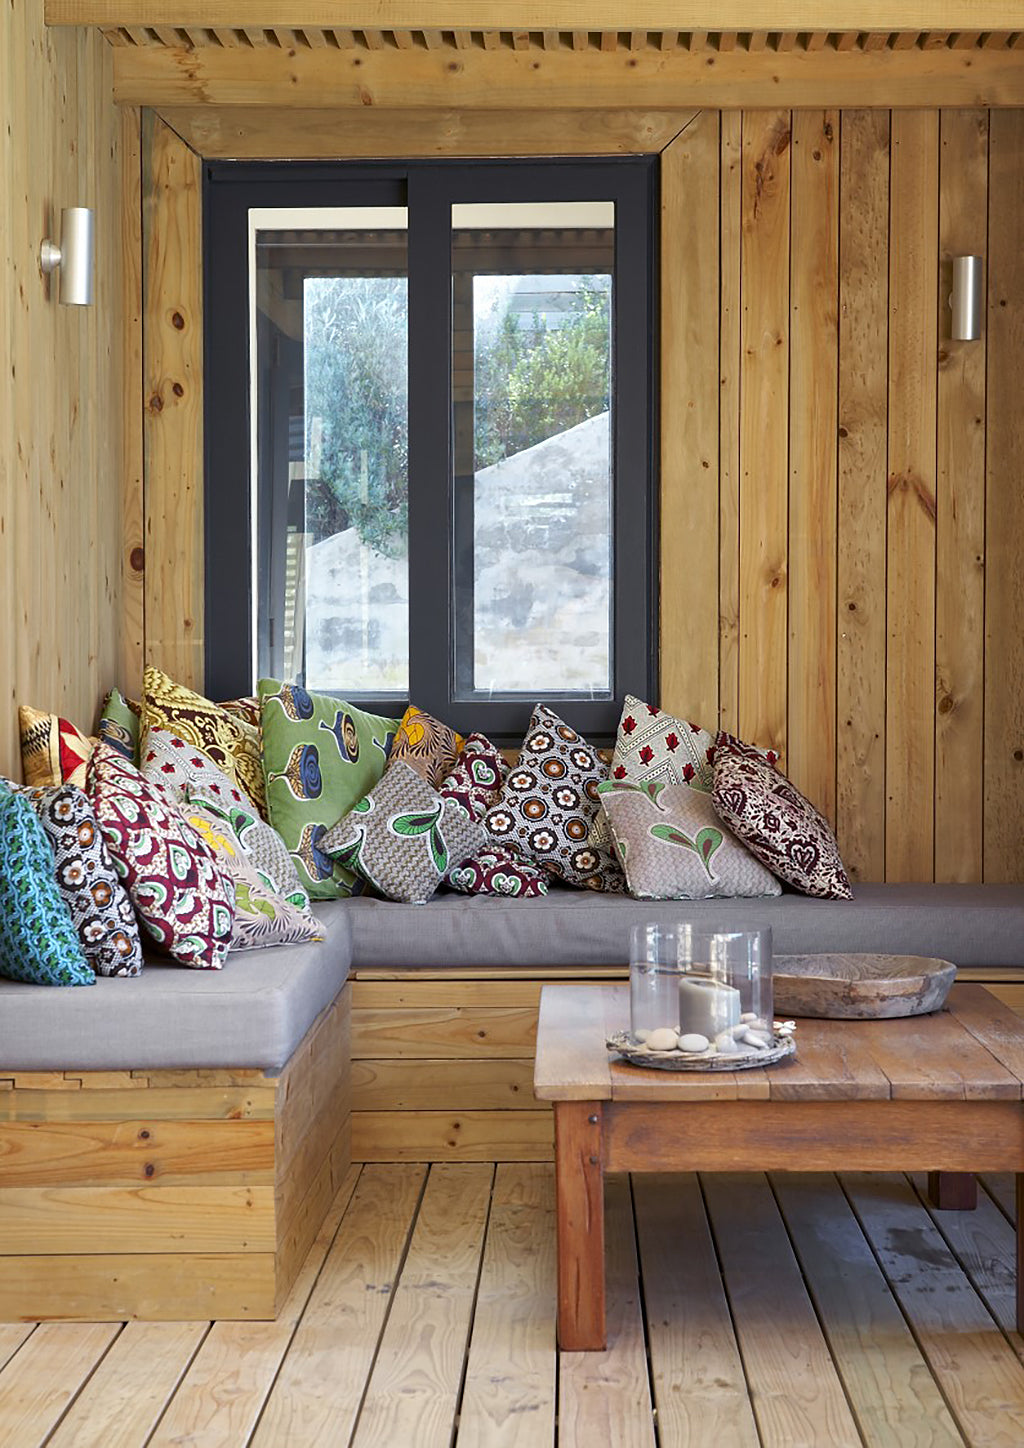 Safari Journal / Blog by Safari Fusion | Cushion stack | Comfortable outdoor seating in an Australian inspired beach house in Plettenberg Bay, South Africa